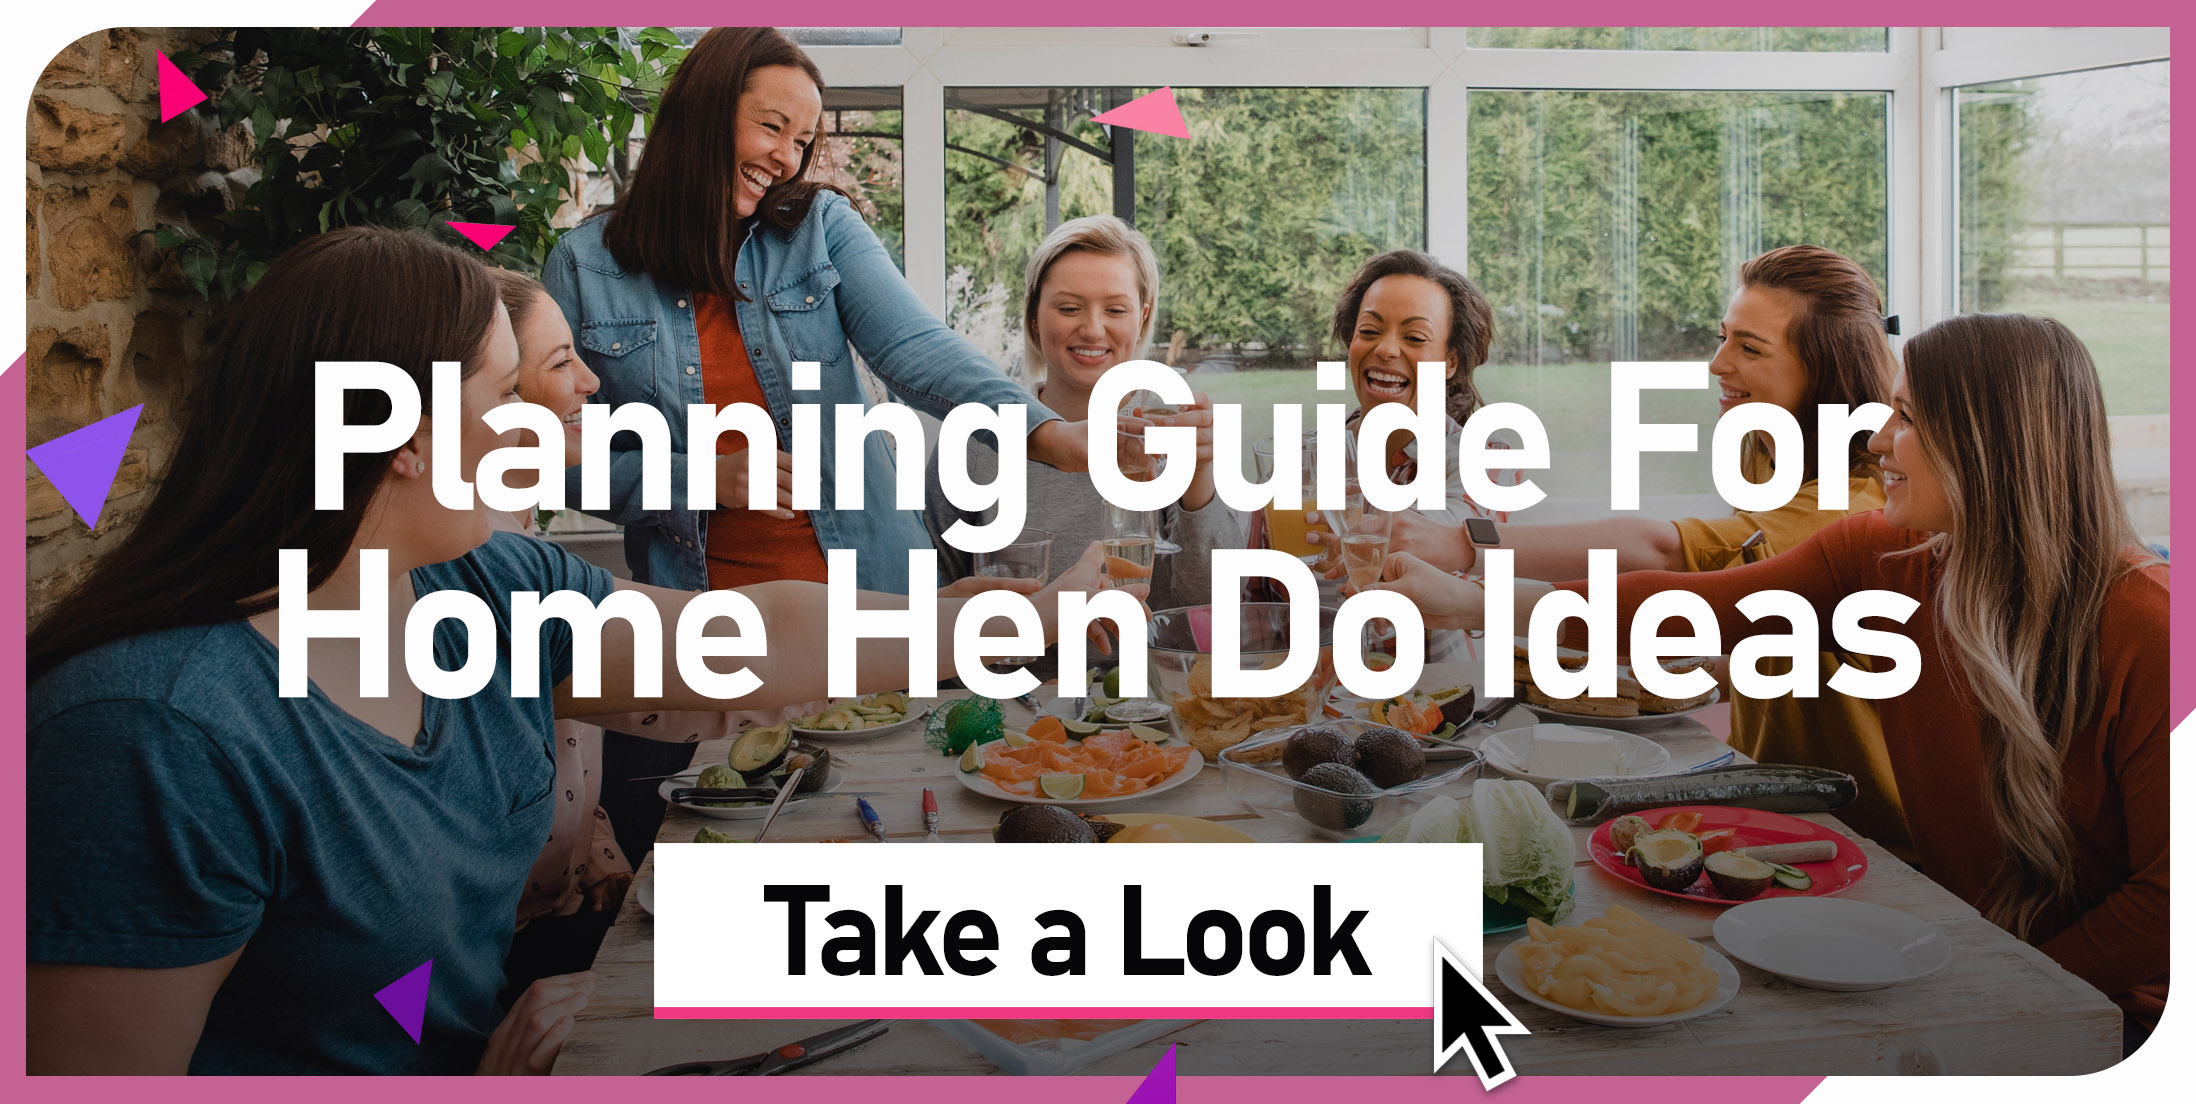 Planning Guide for Home Hen Do Ideas